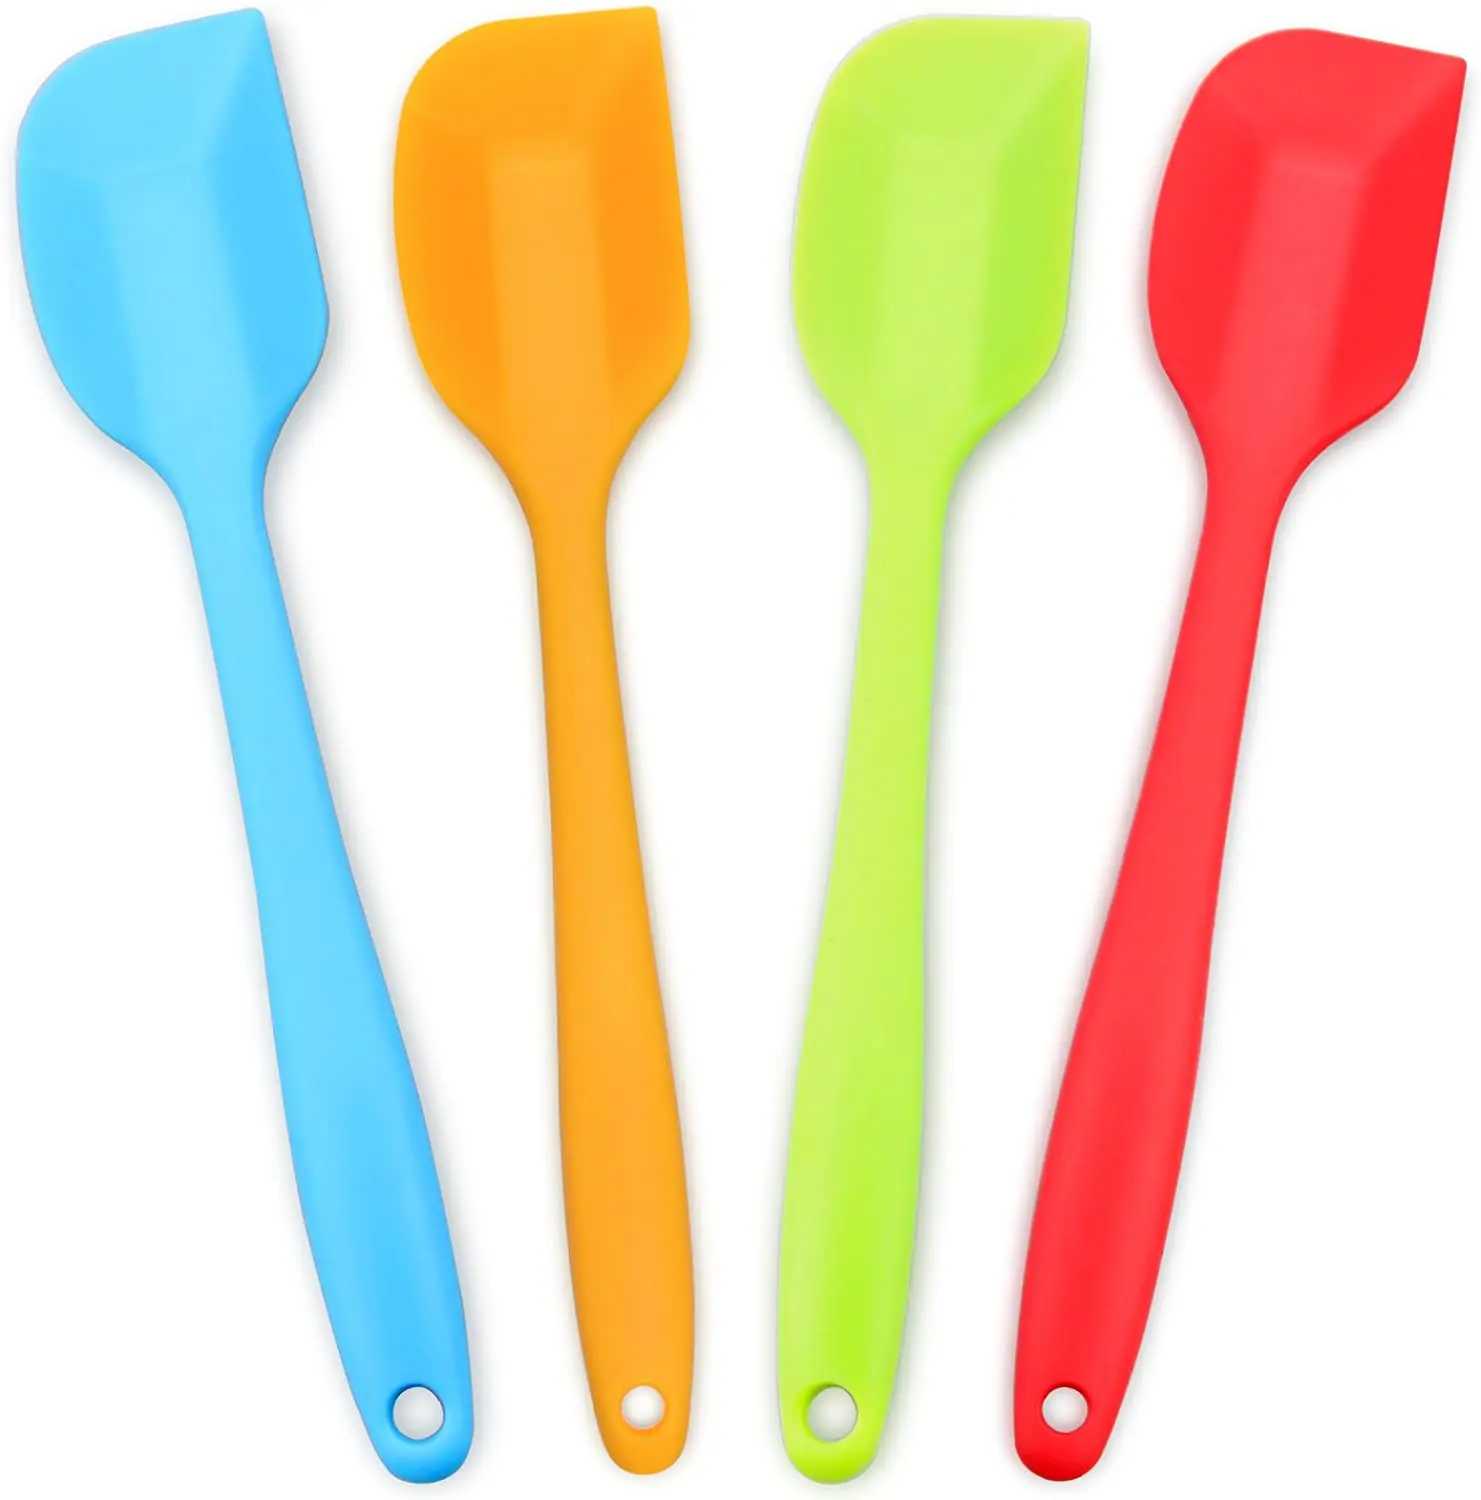 Cooking Baking Cake Butter Kitchen Utensil Silicone Quality Spatula High B4E8 